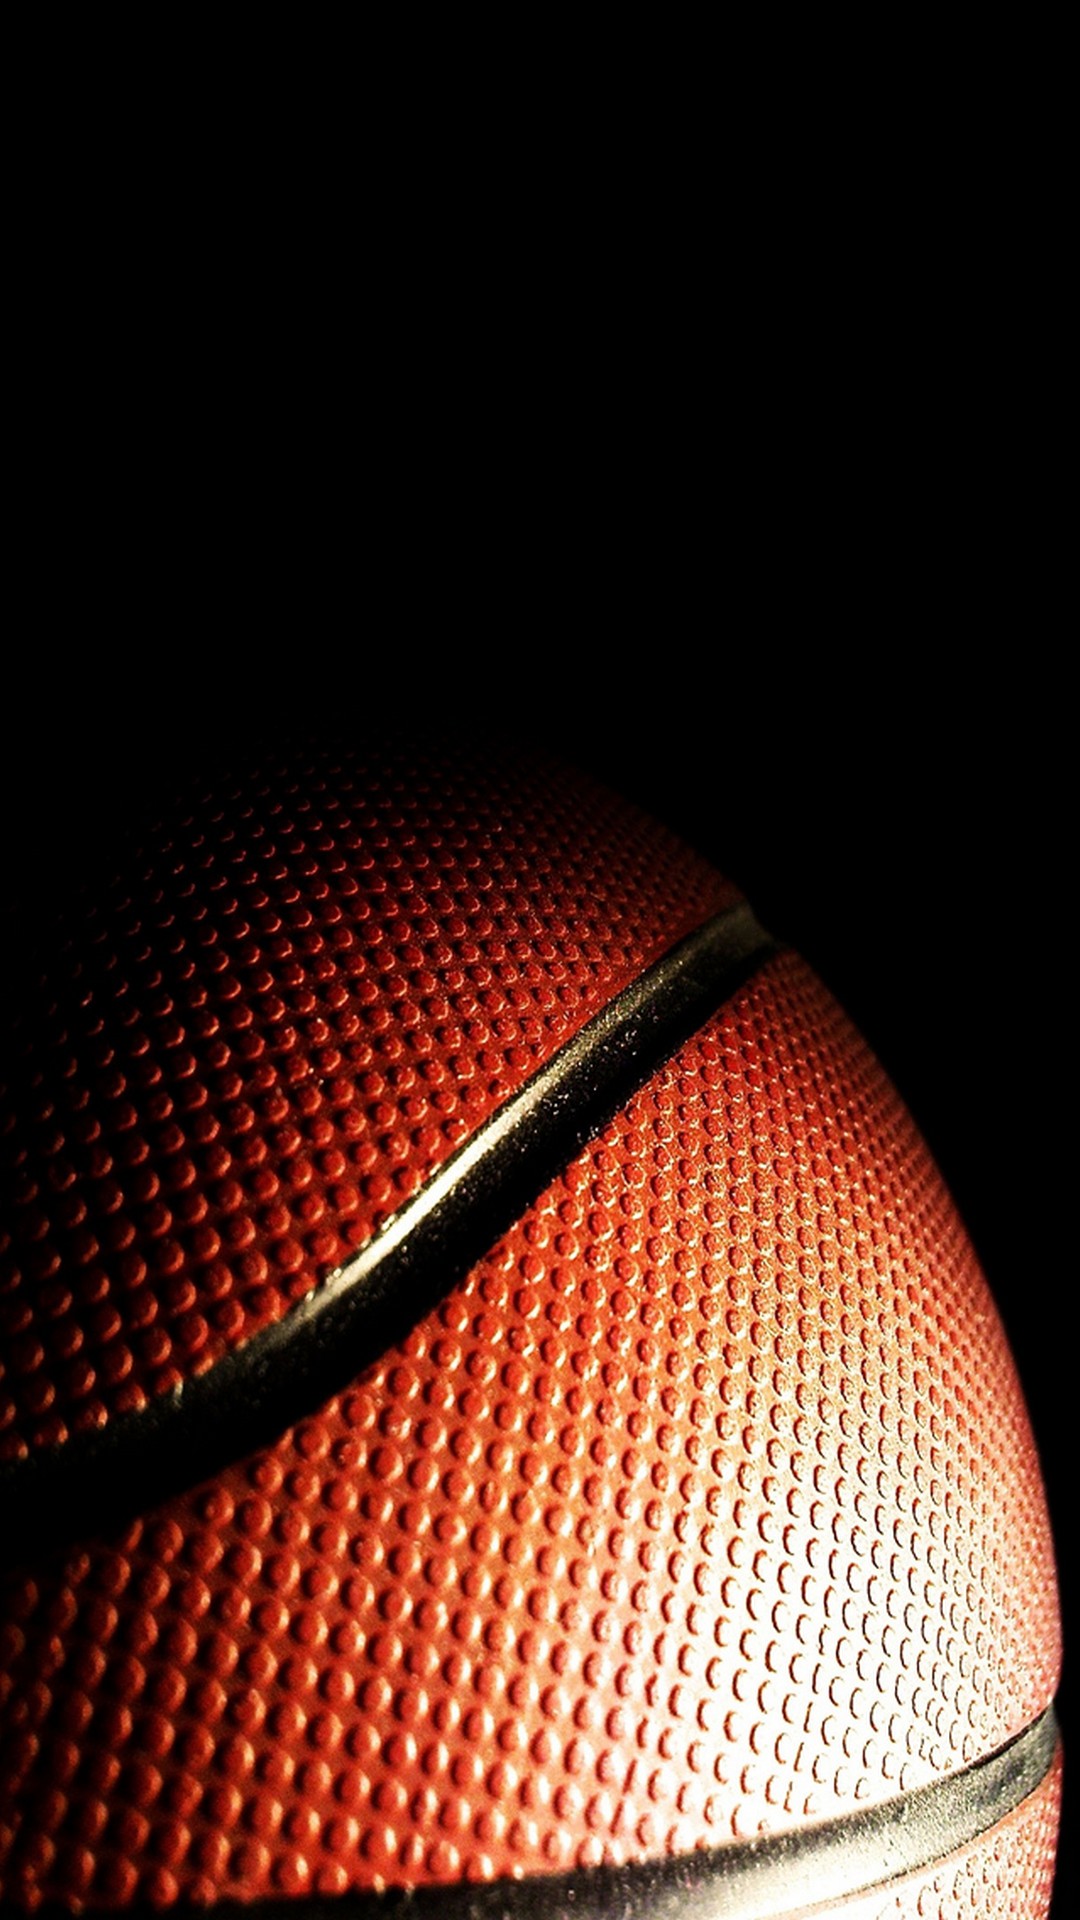 NBA iPhone 7 Wallpaper with image dimensions 1080x1920 pixel. You can make this wallpaper for your Desktop Computer Backgrounds, Windows or Mac Screensavers, iPhone Lock screen, Tablet or Android and another Mobile Phone device